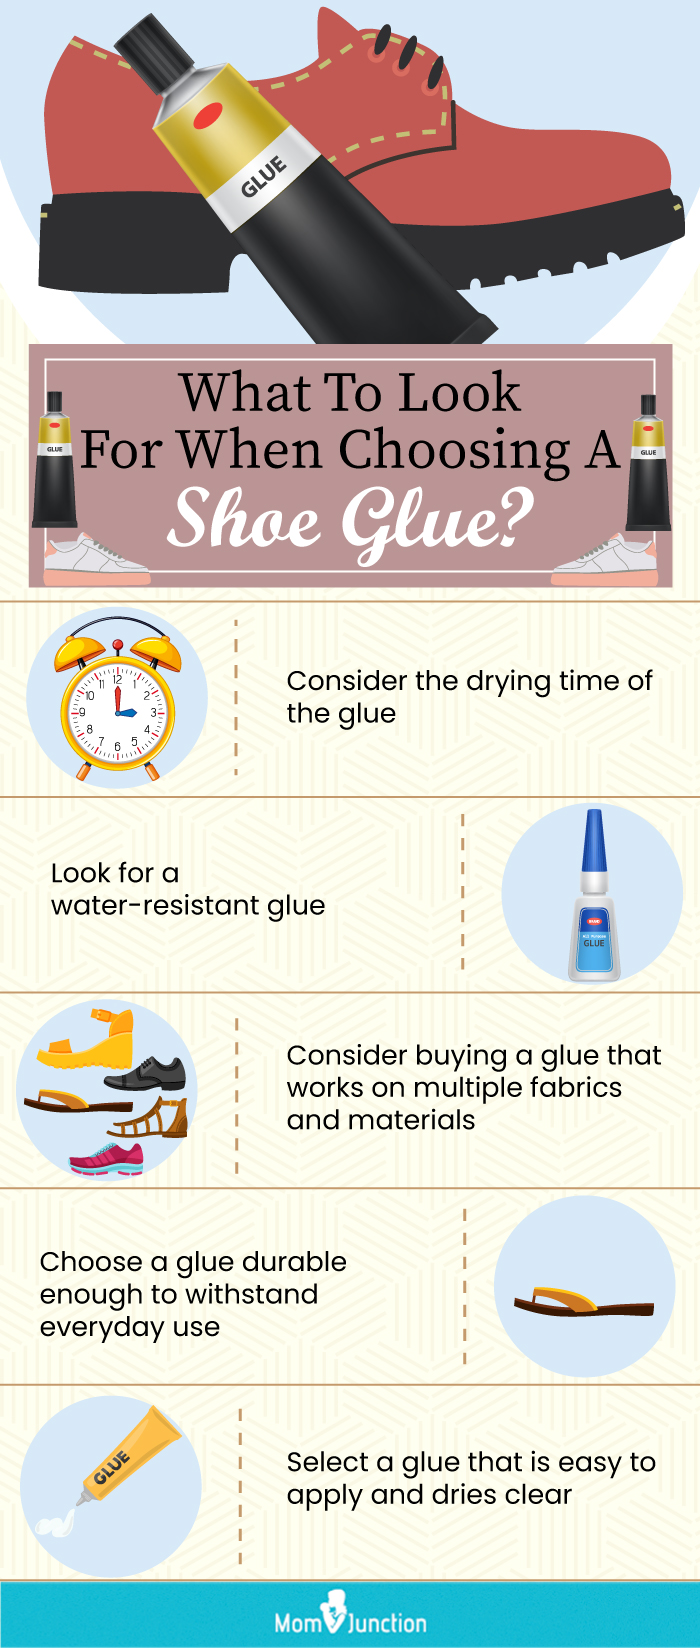 Shoes stickers)Shoe Glue Repair Adhesive Strong Shoe Glue Sole Adhesive  Professional Shoe Glue Waterproof Repair Adhesive For Sneakers Hiking Shoes  A